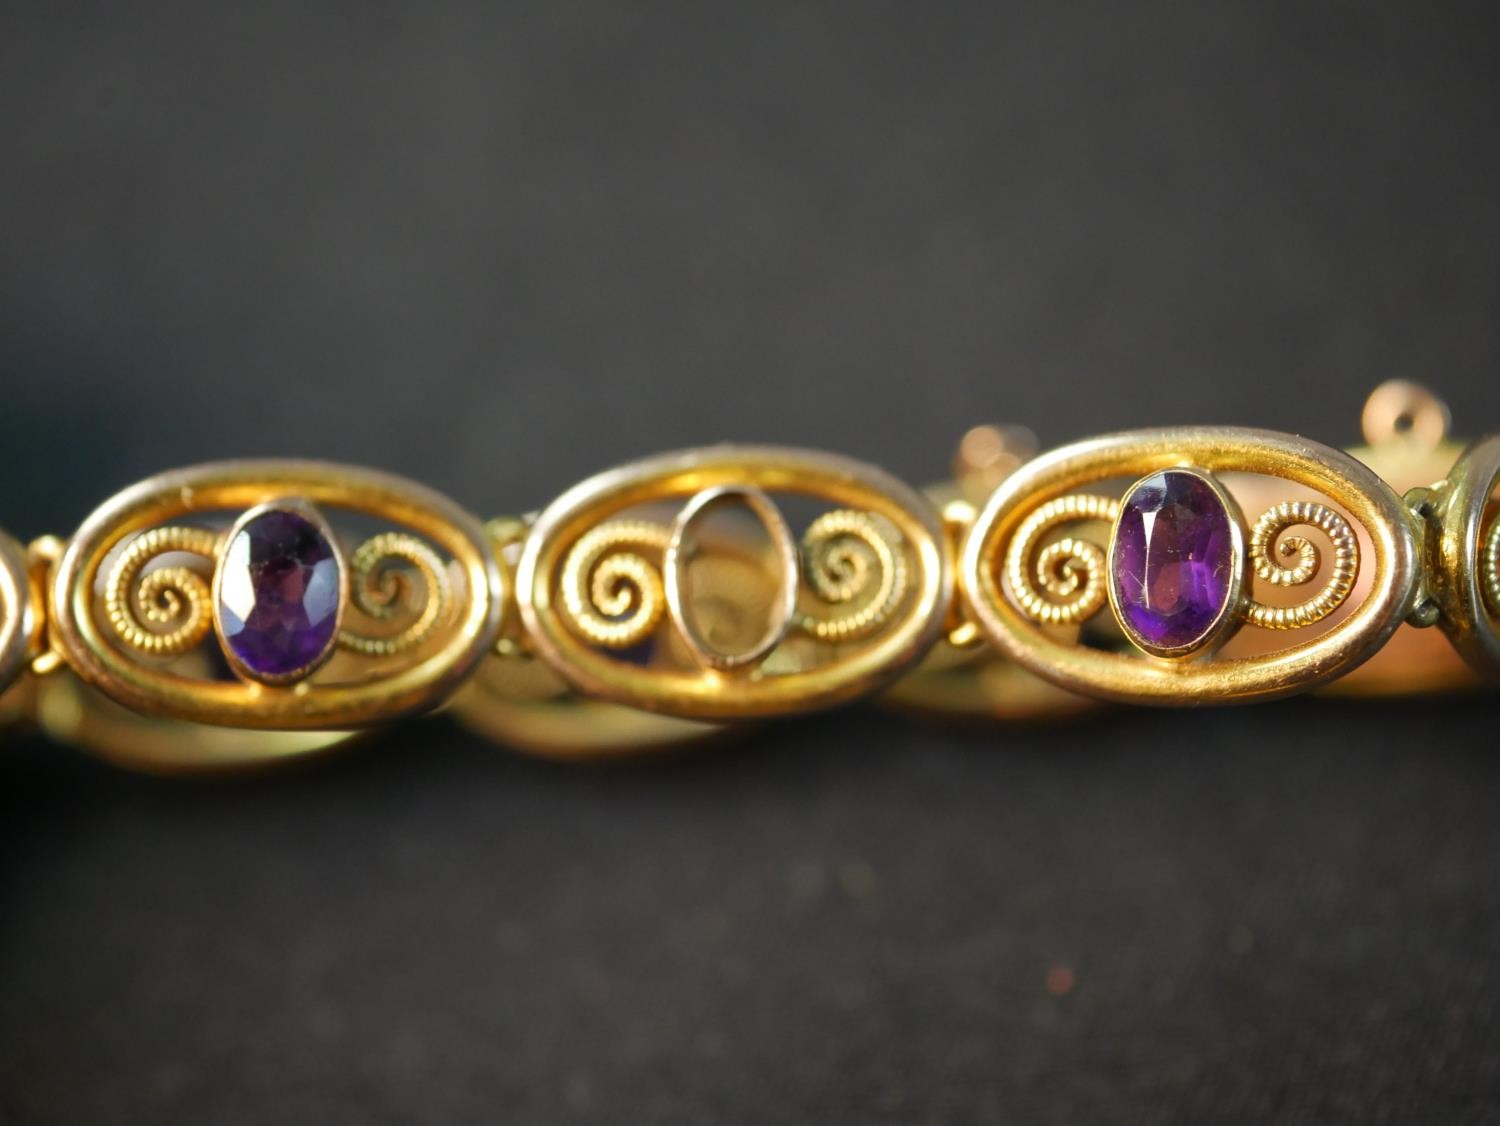 An Art Nouveau spiral design Murrle & Bennet 9ct yellow gold articulated panel bracelet, set with - Image 3 of 6